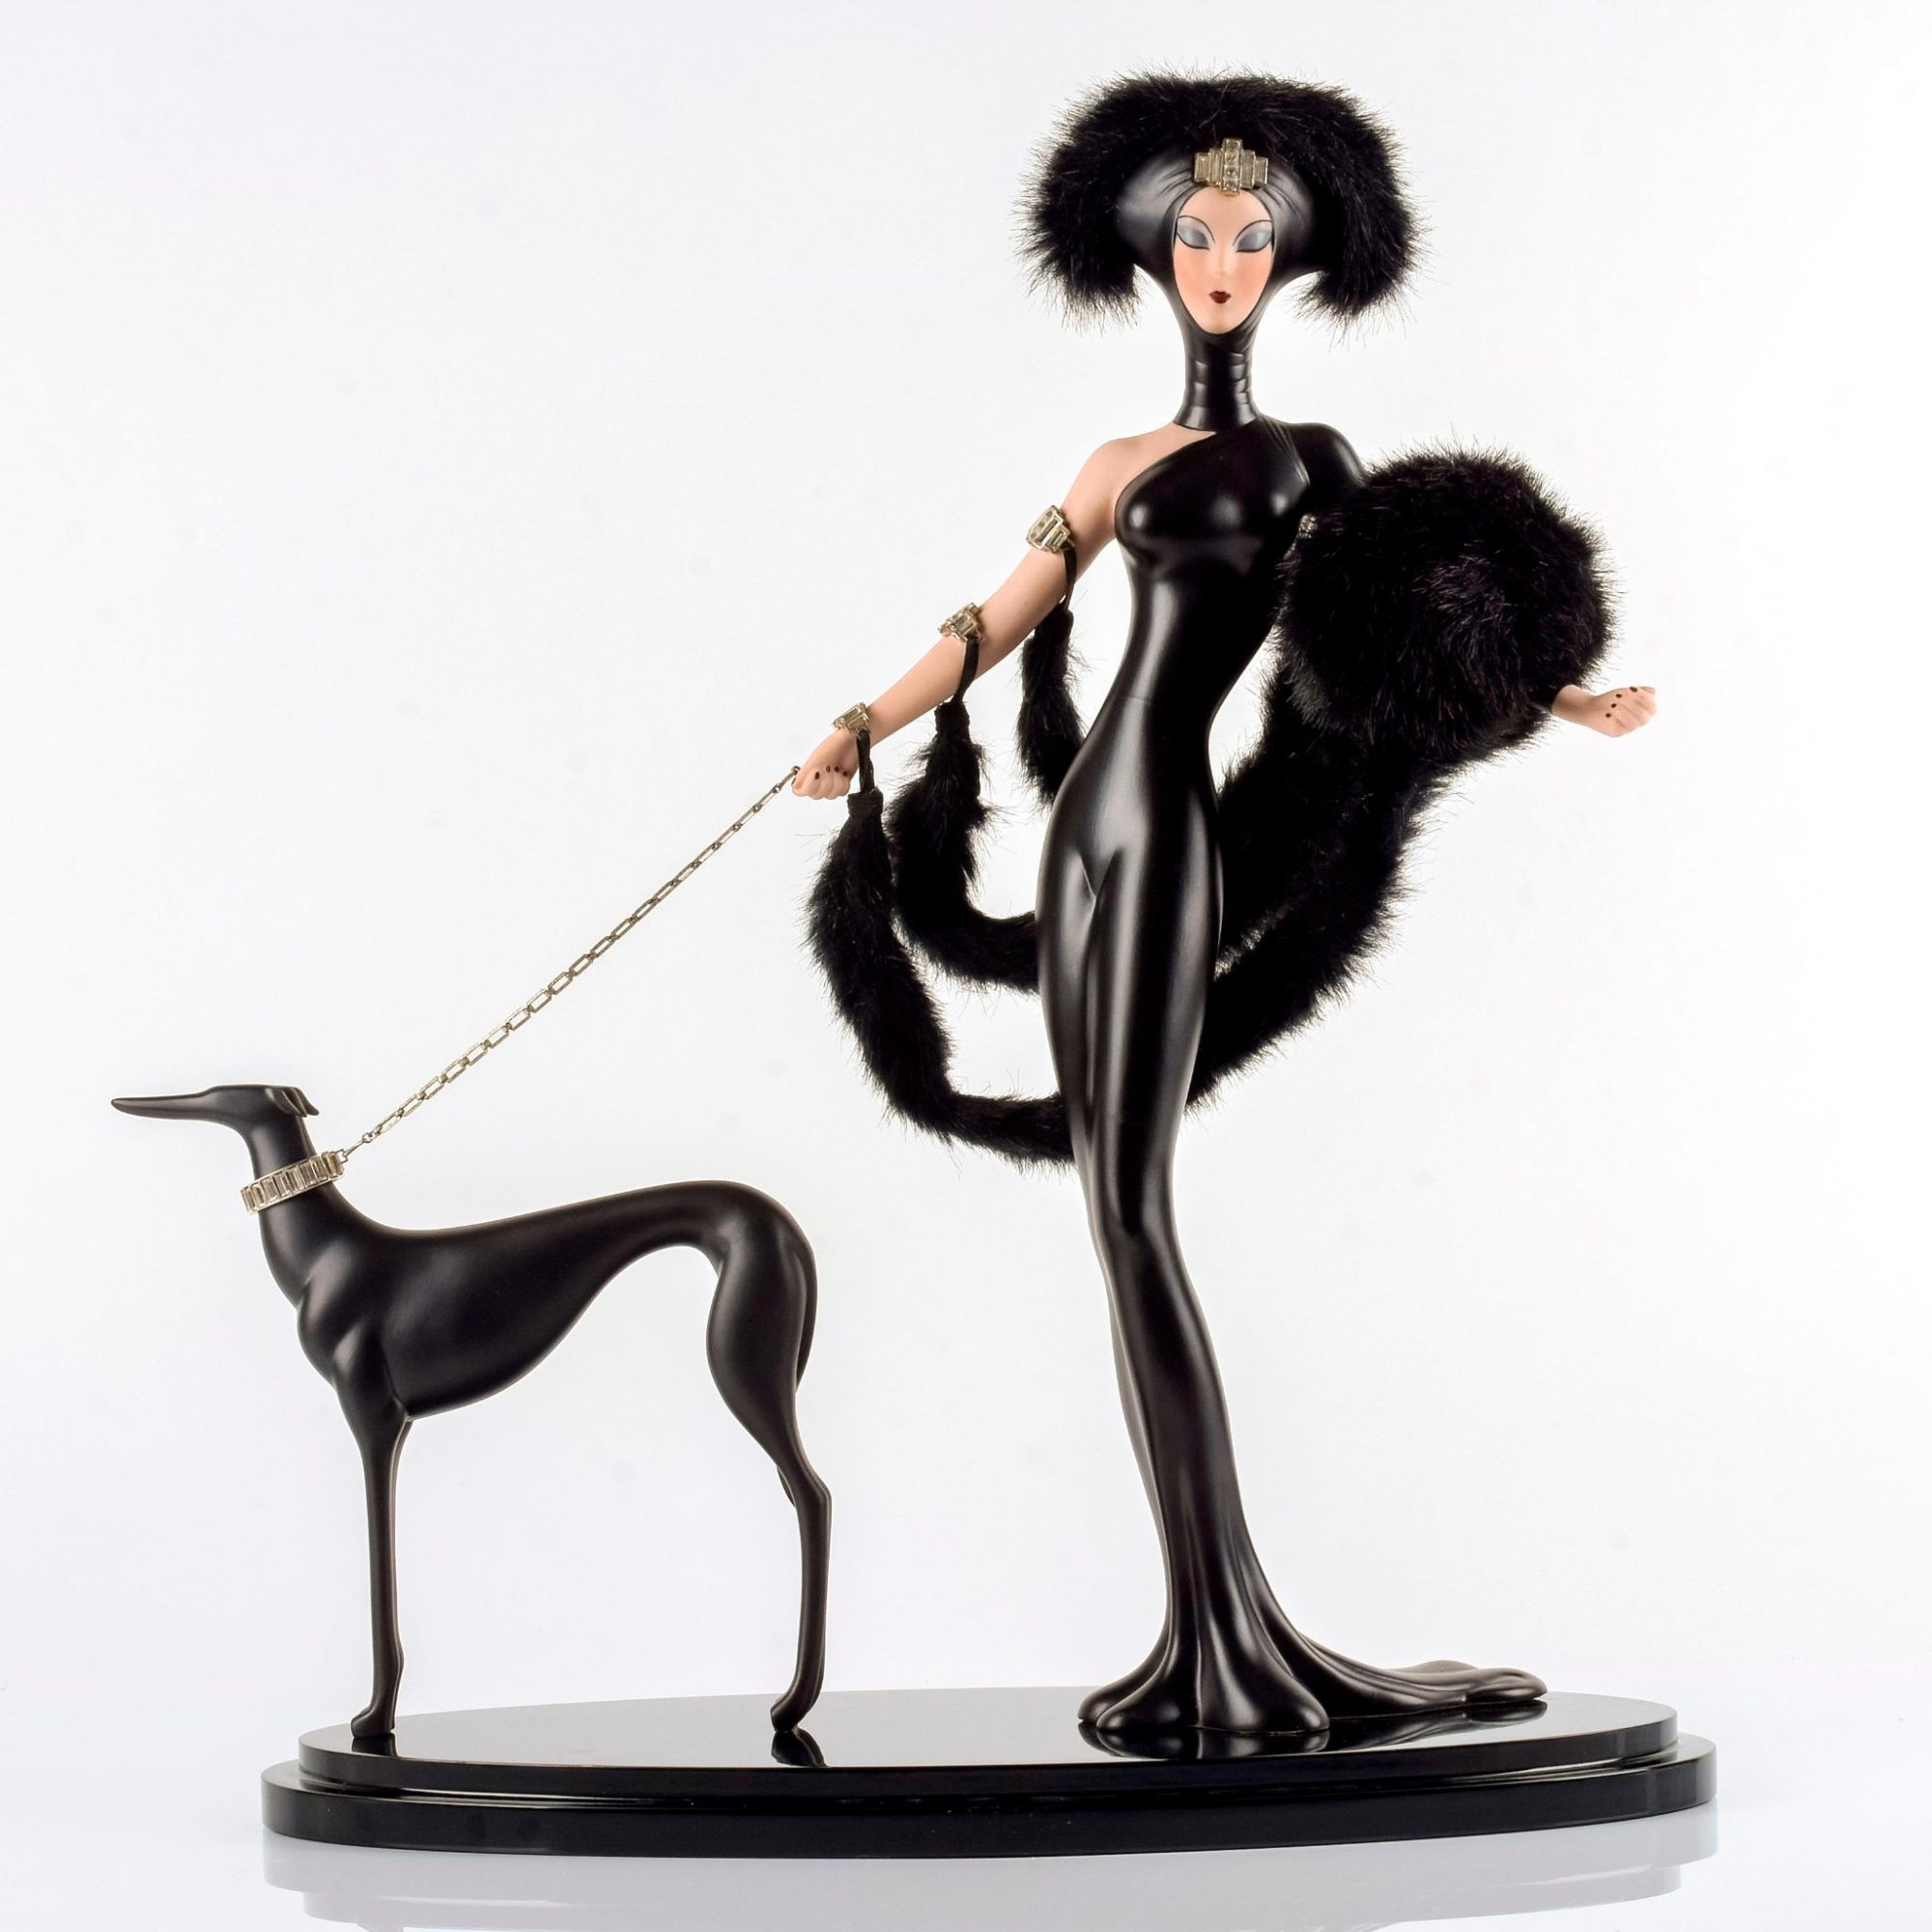 Image of an Erte Figurine with greyhound on a leash